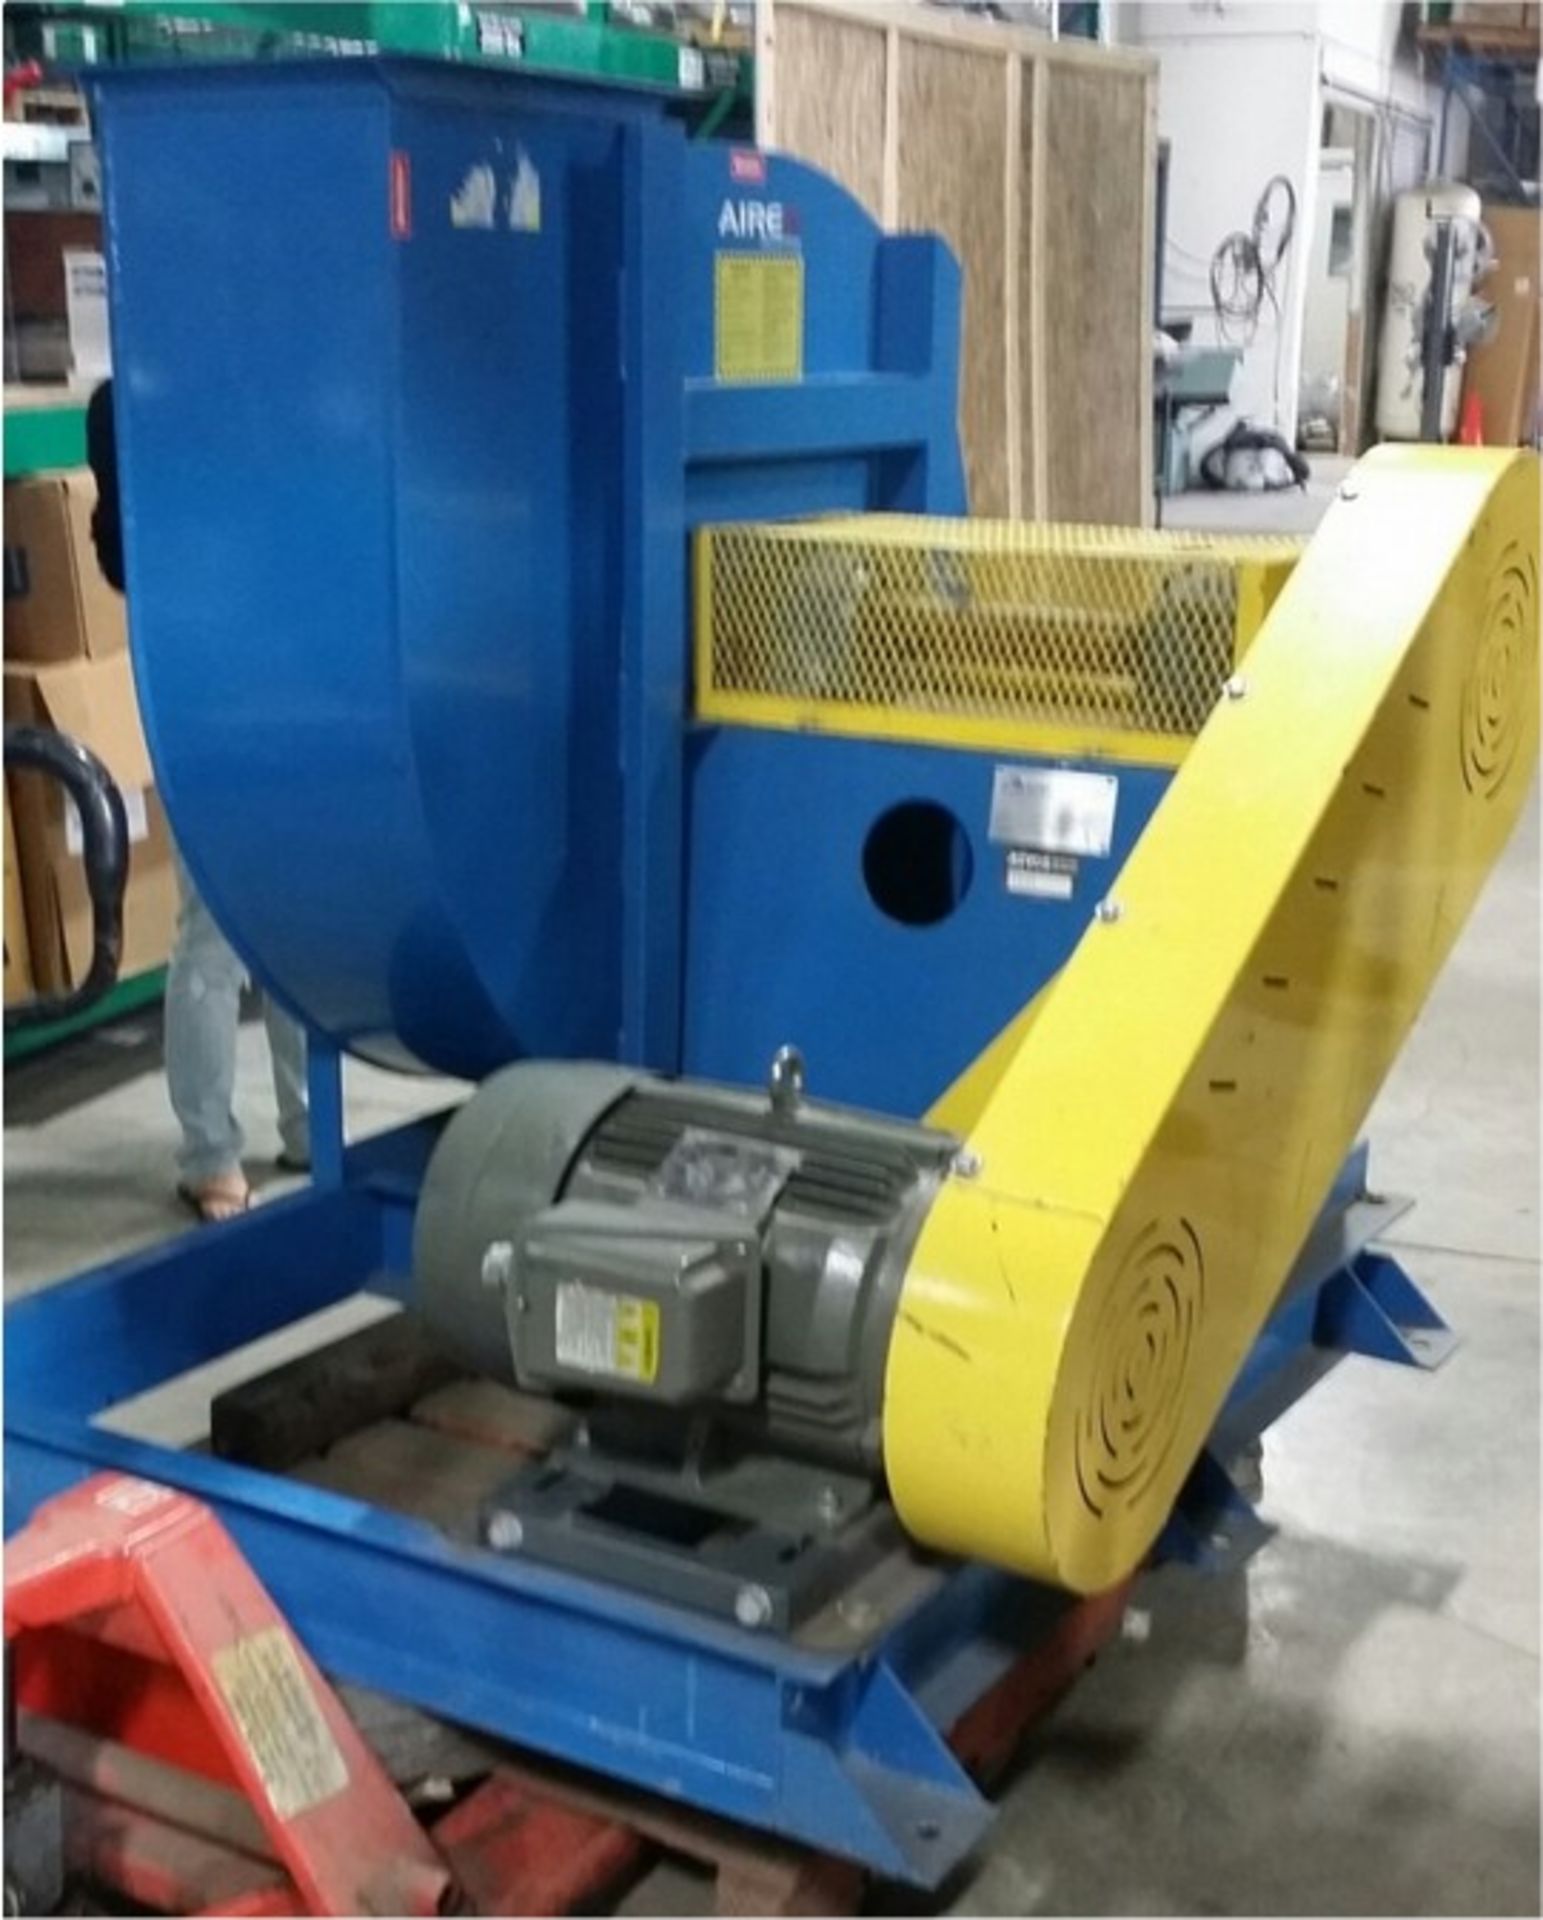 AIREX Model RXI 17LS CL4 Radial Wheel Industrial Blower, Spec: 600 volts, 3 phase, 19,7 amps, 25hp( - Image 2 of 3